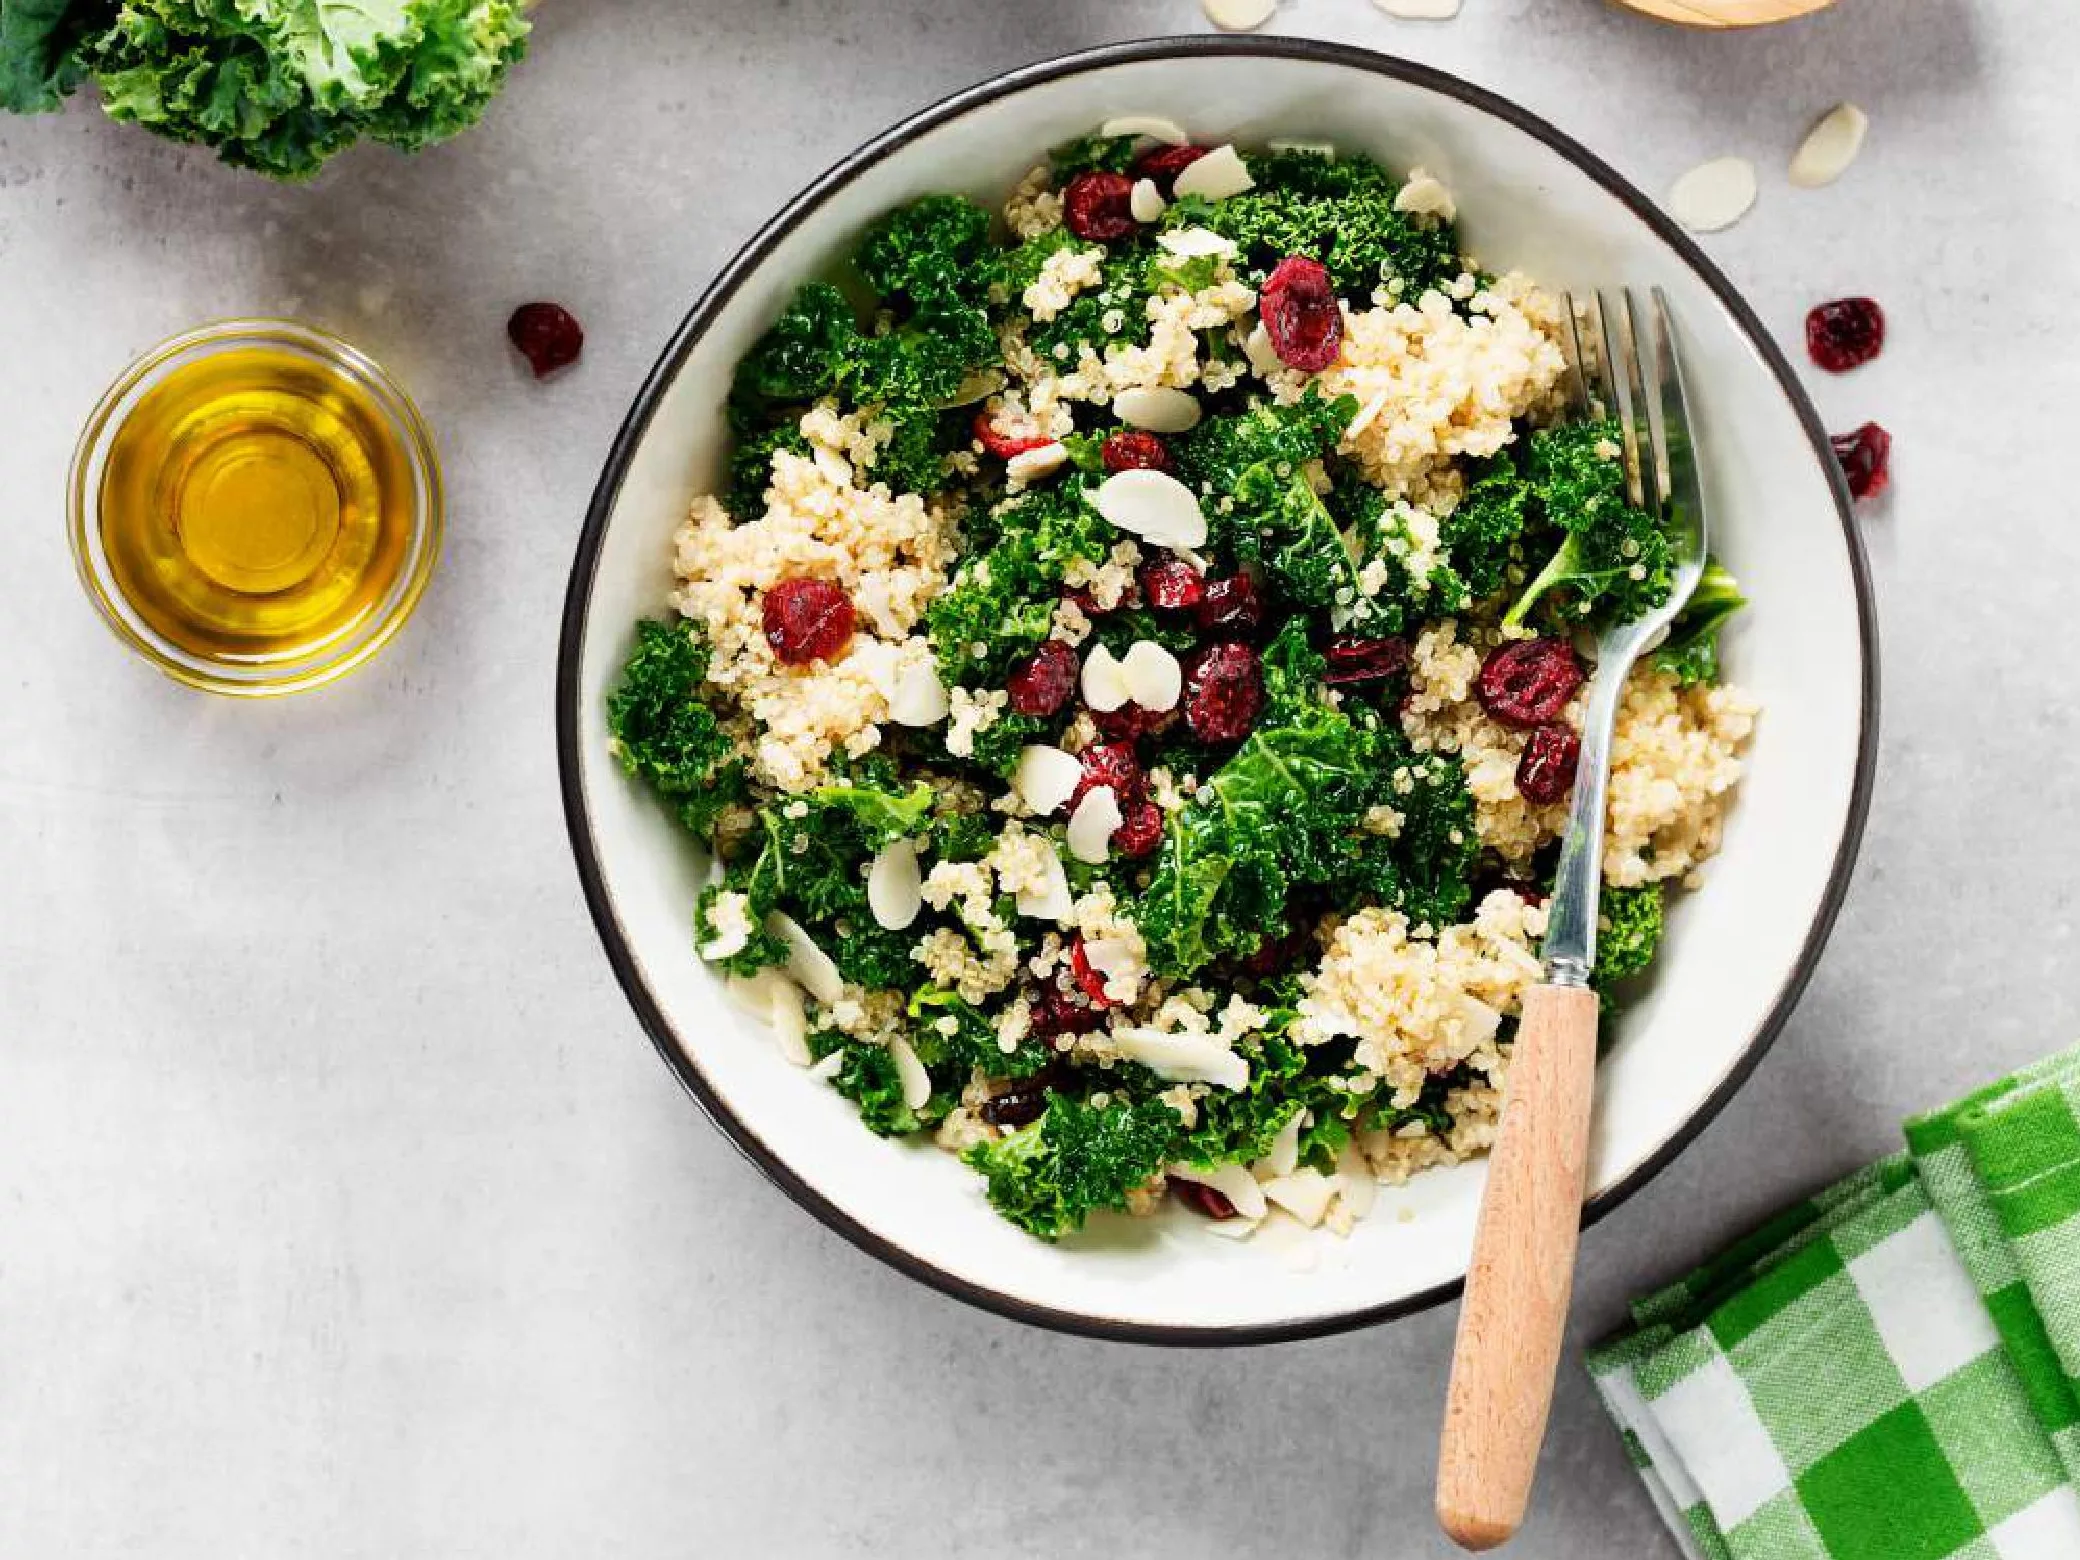 A quinoa, kale, and cranberry salad shown from above